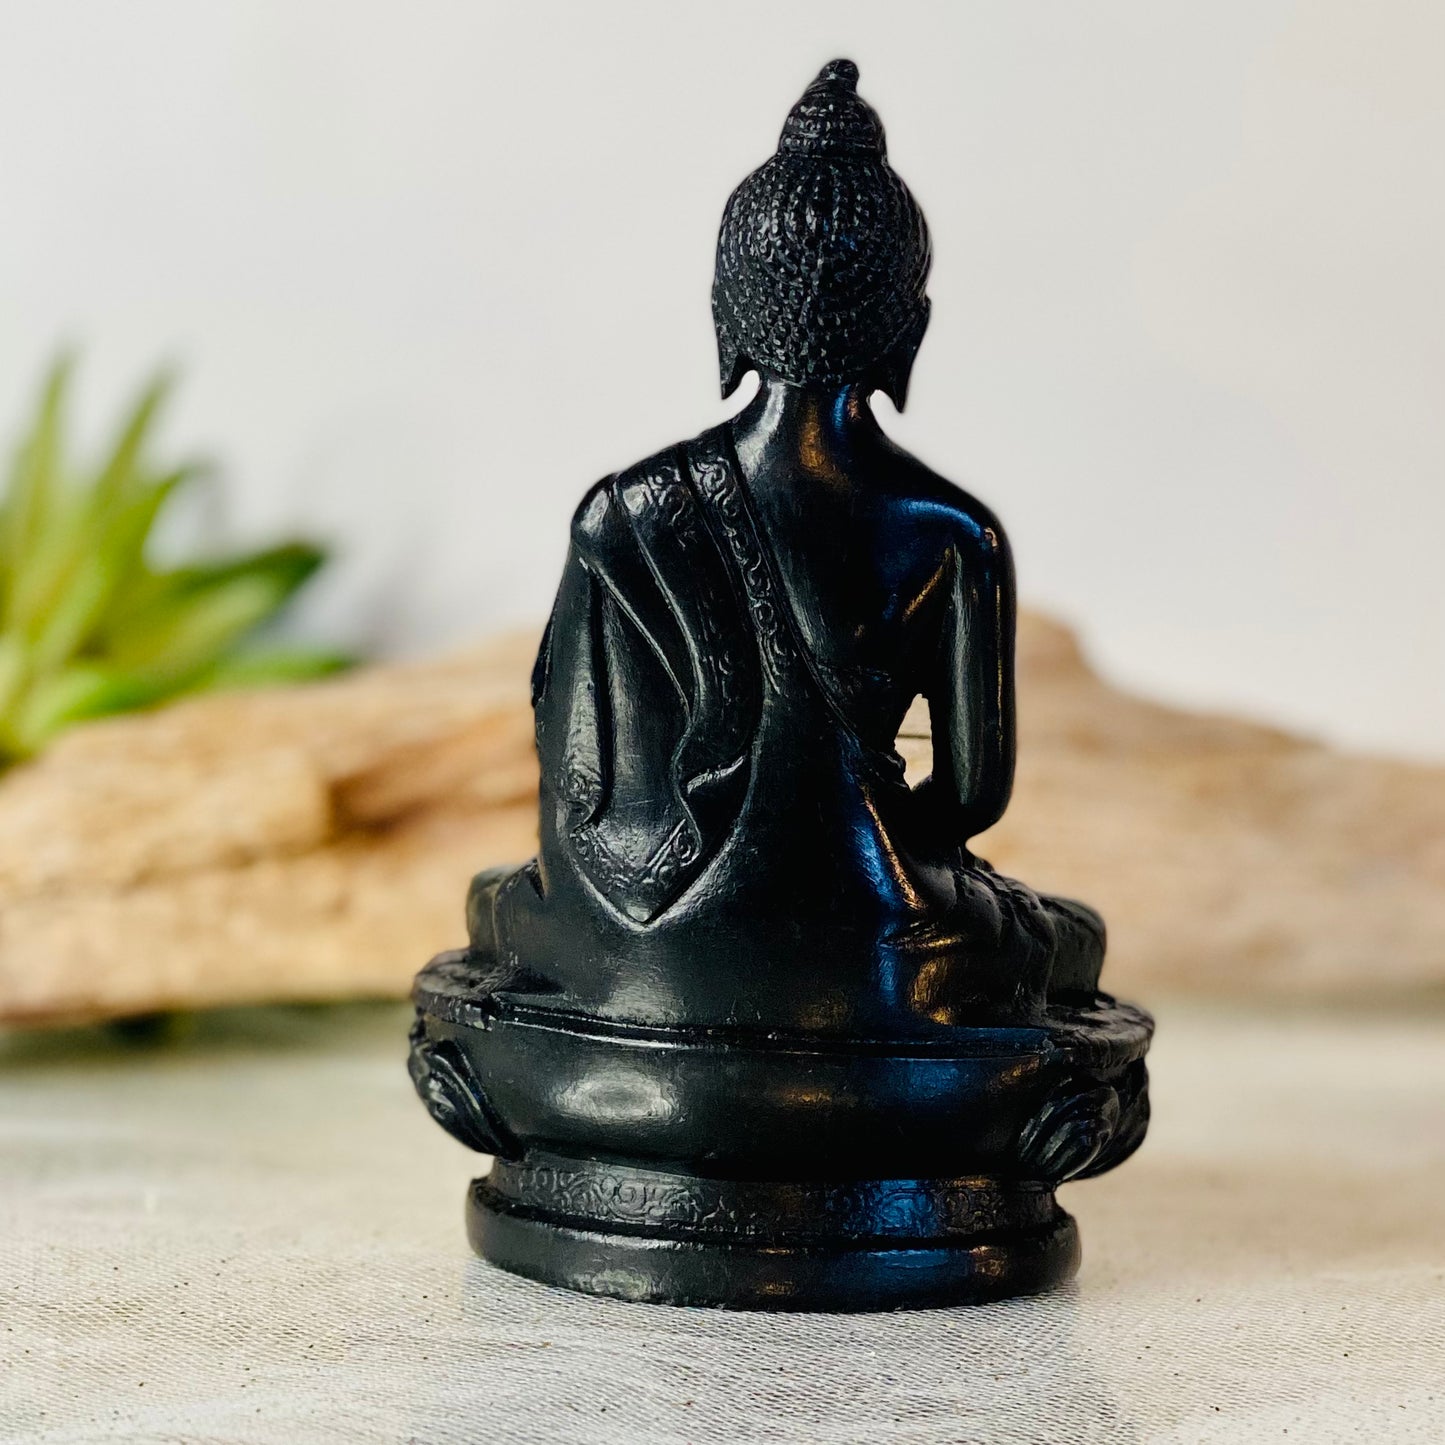 Sacred Serenity: Authentic Black Buddha Statue from Nepal with Healing Energies